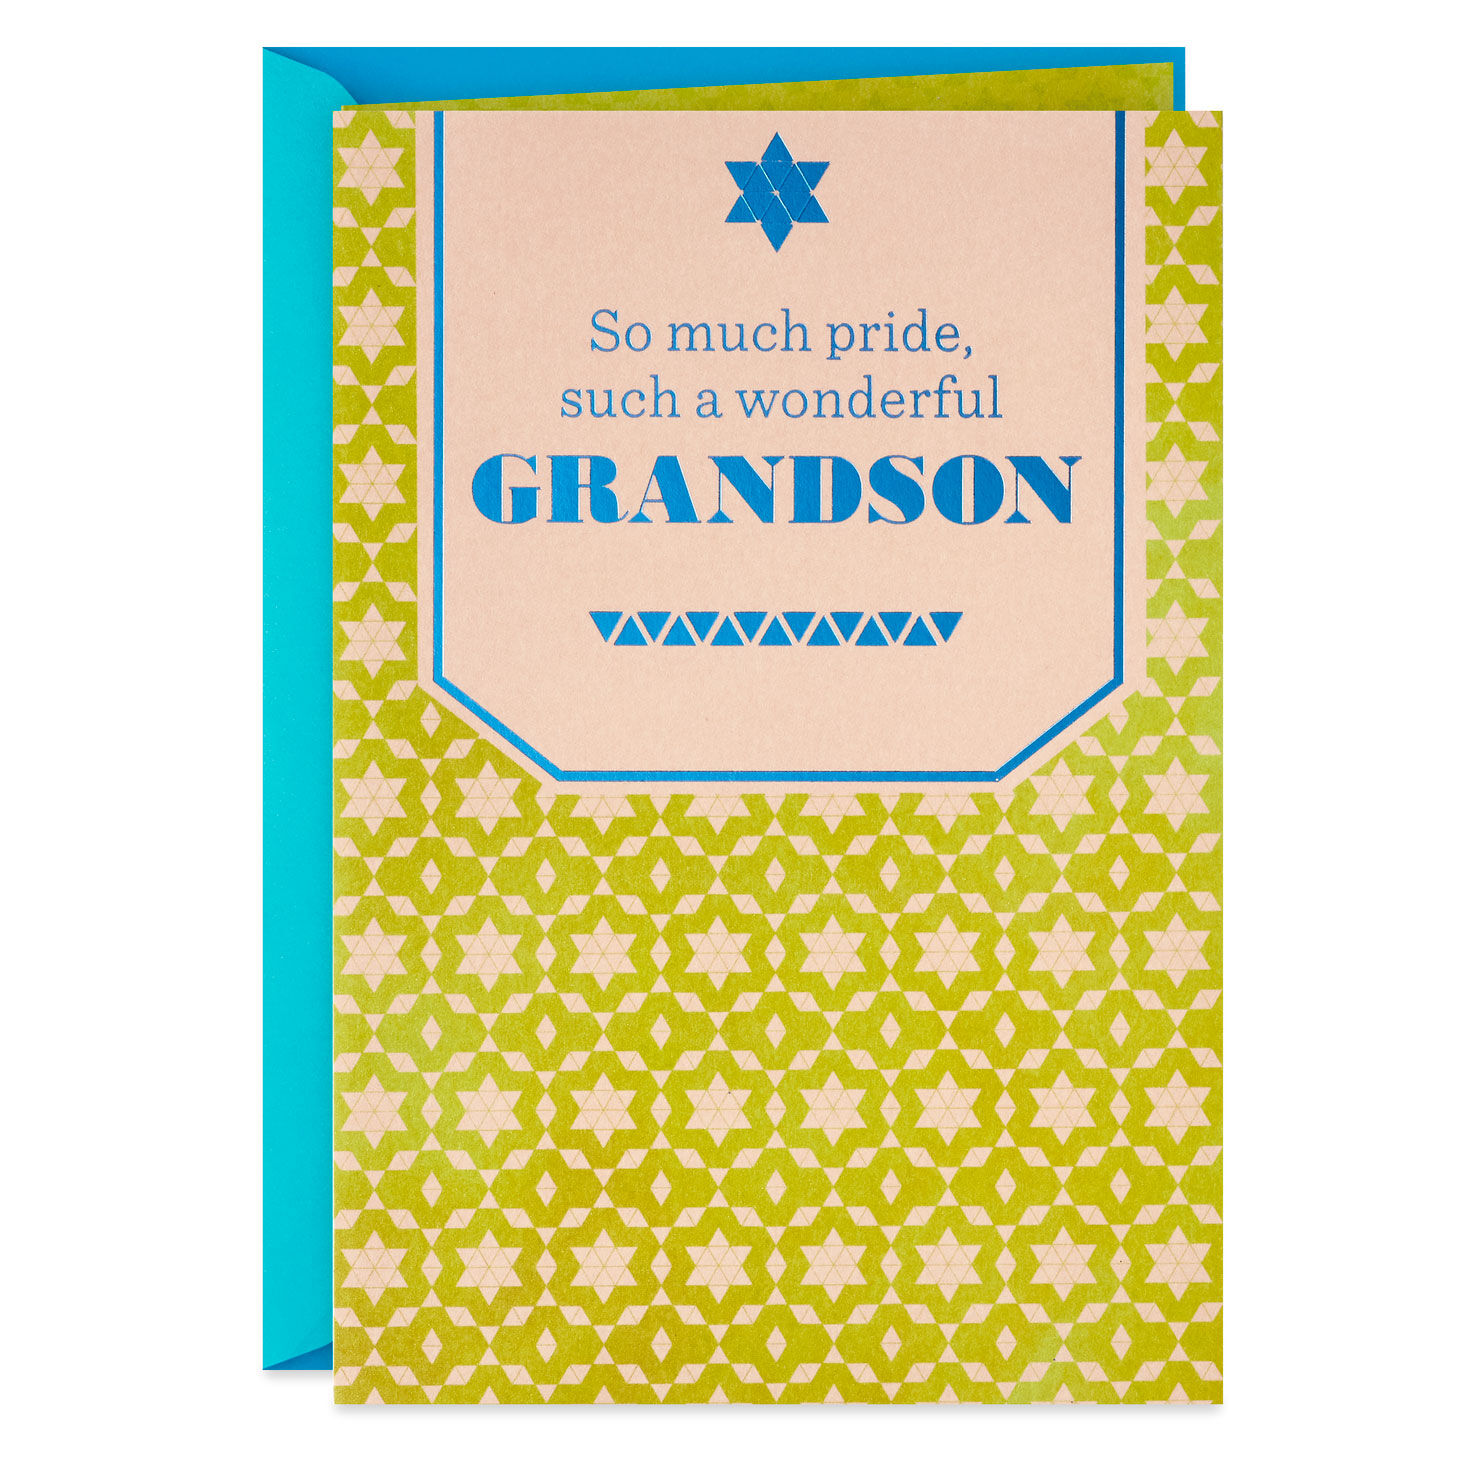 You Make Us All So Proud Bar Mitzvah Card for Grandson for only USD 3.99 | Hallmark